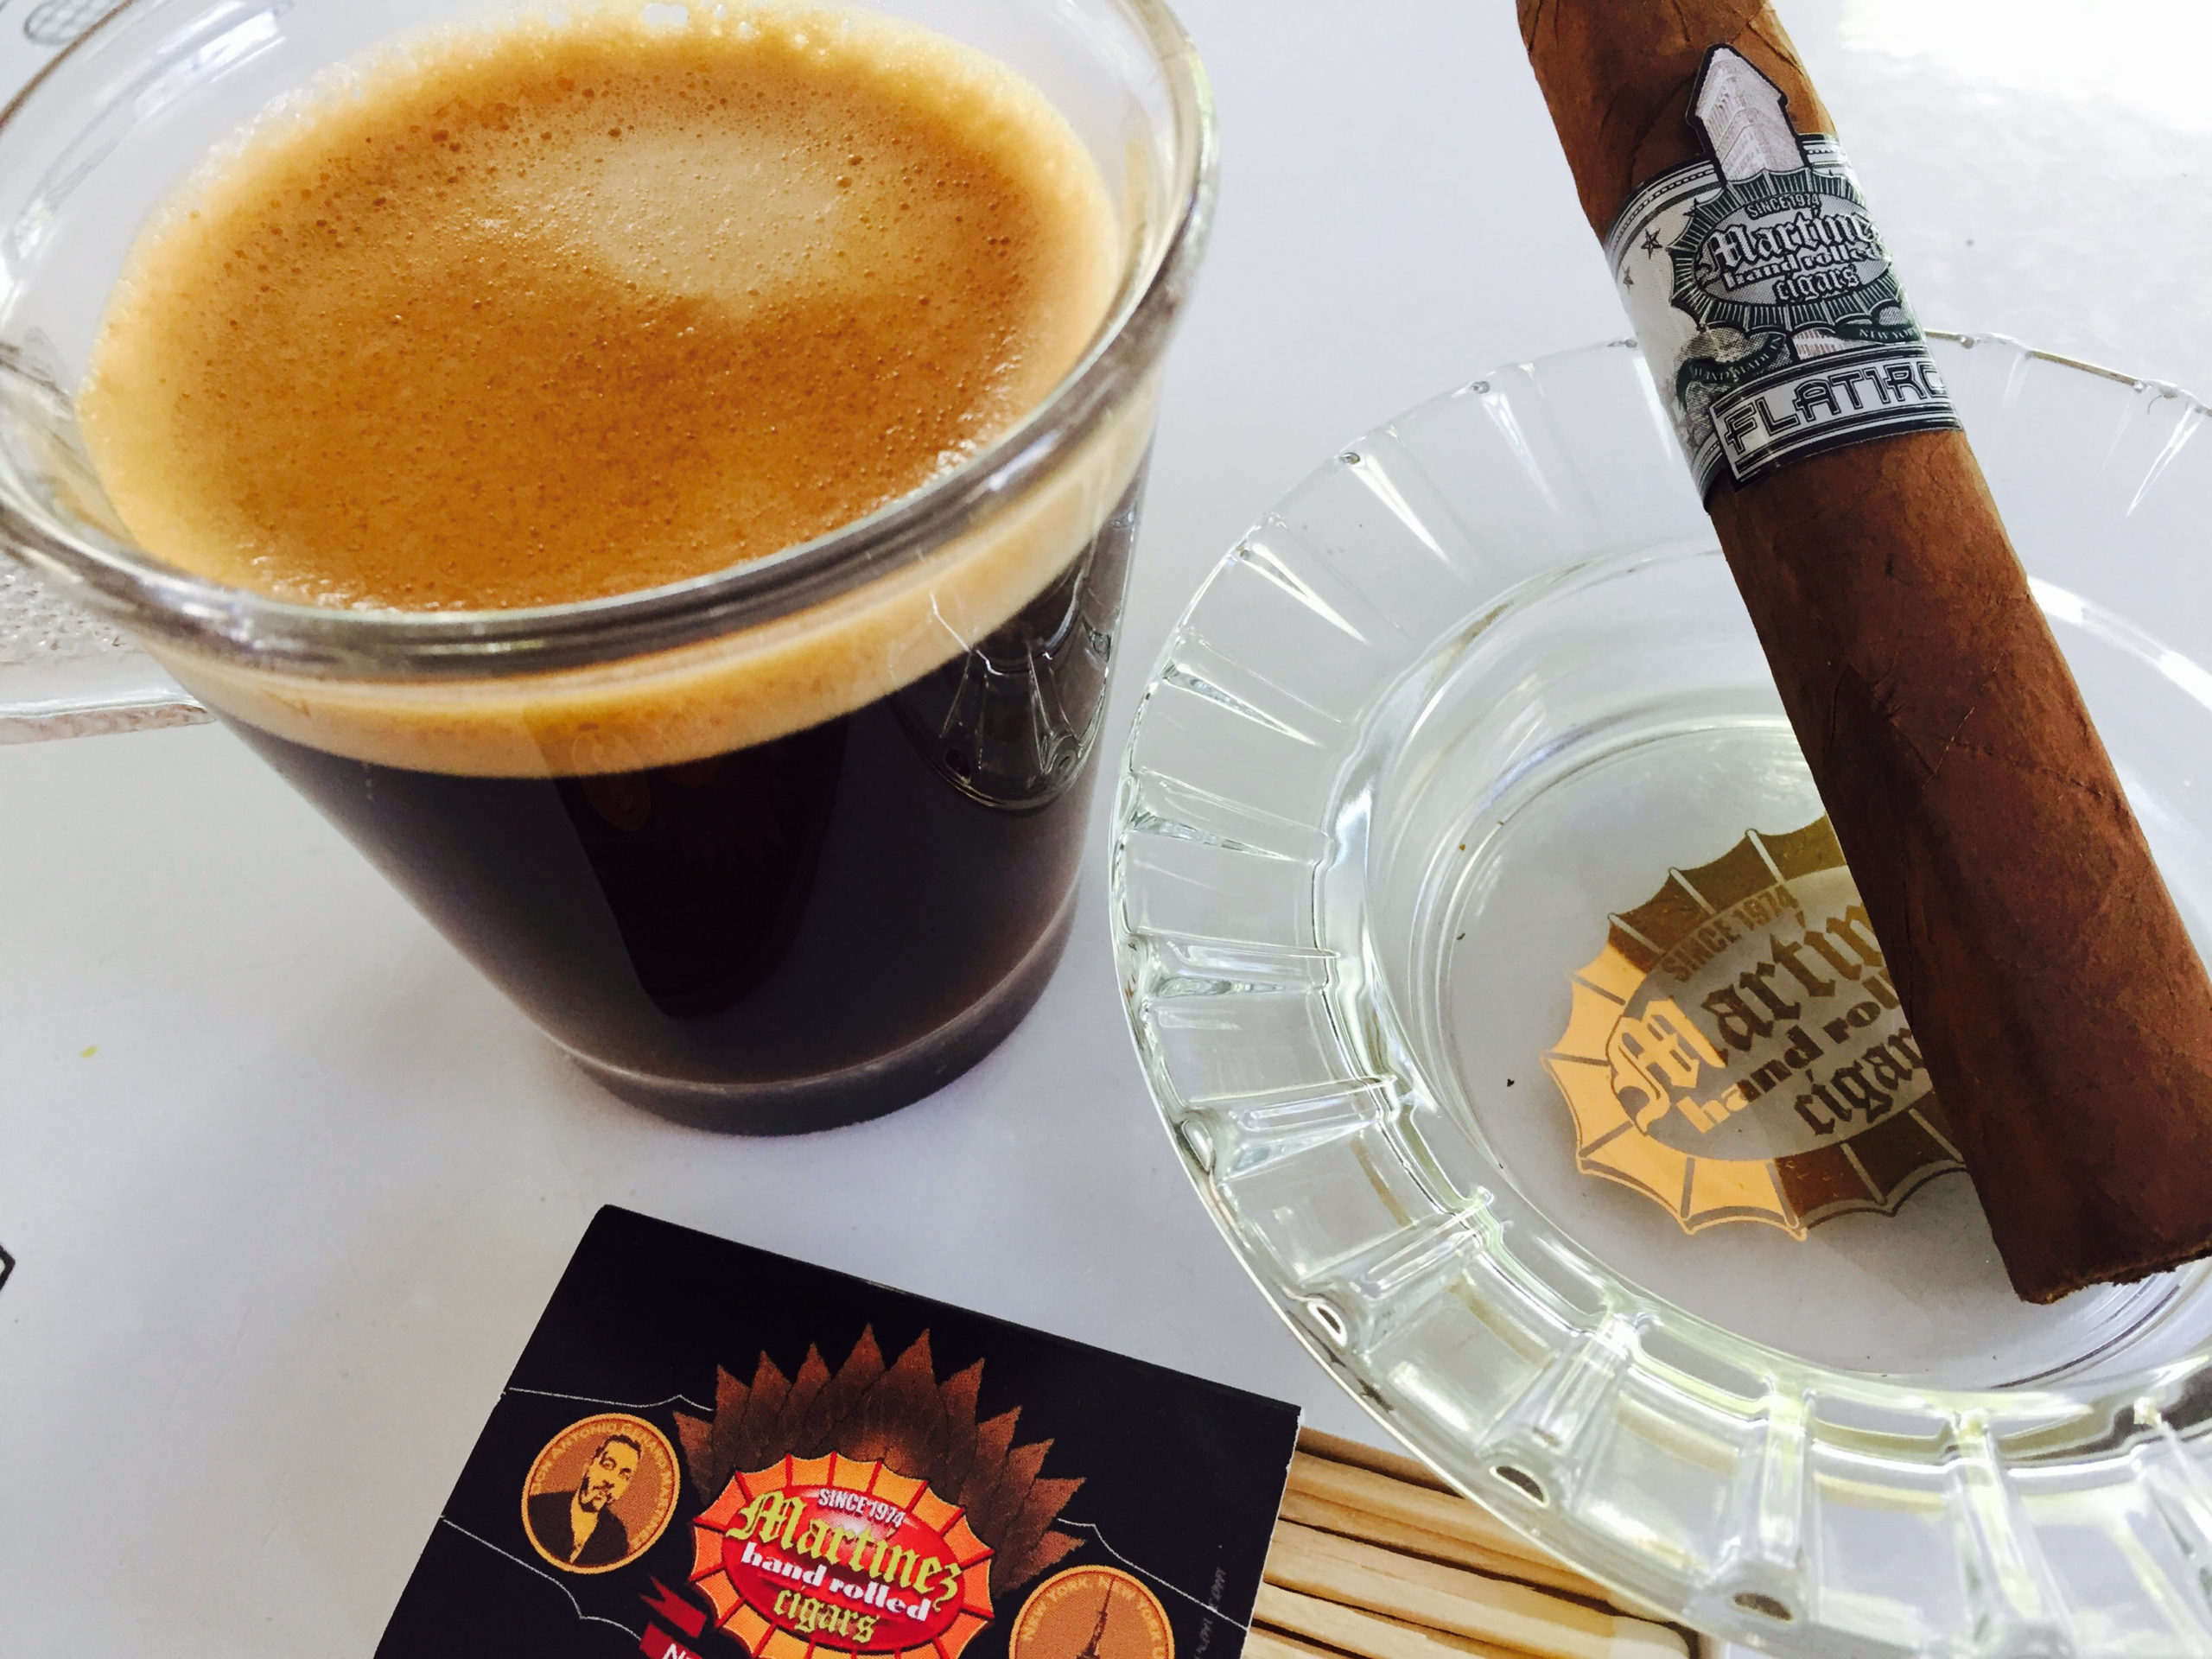 Cigar Pairing with Coffee